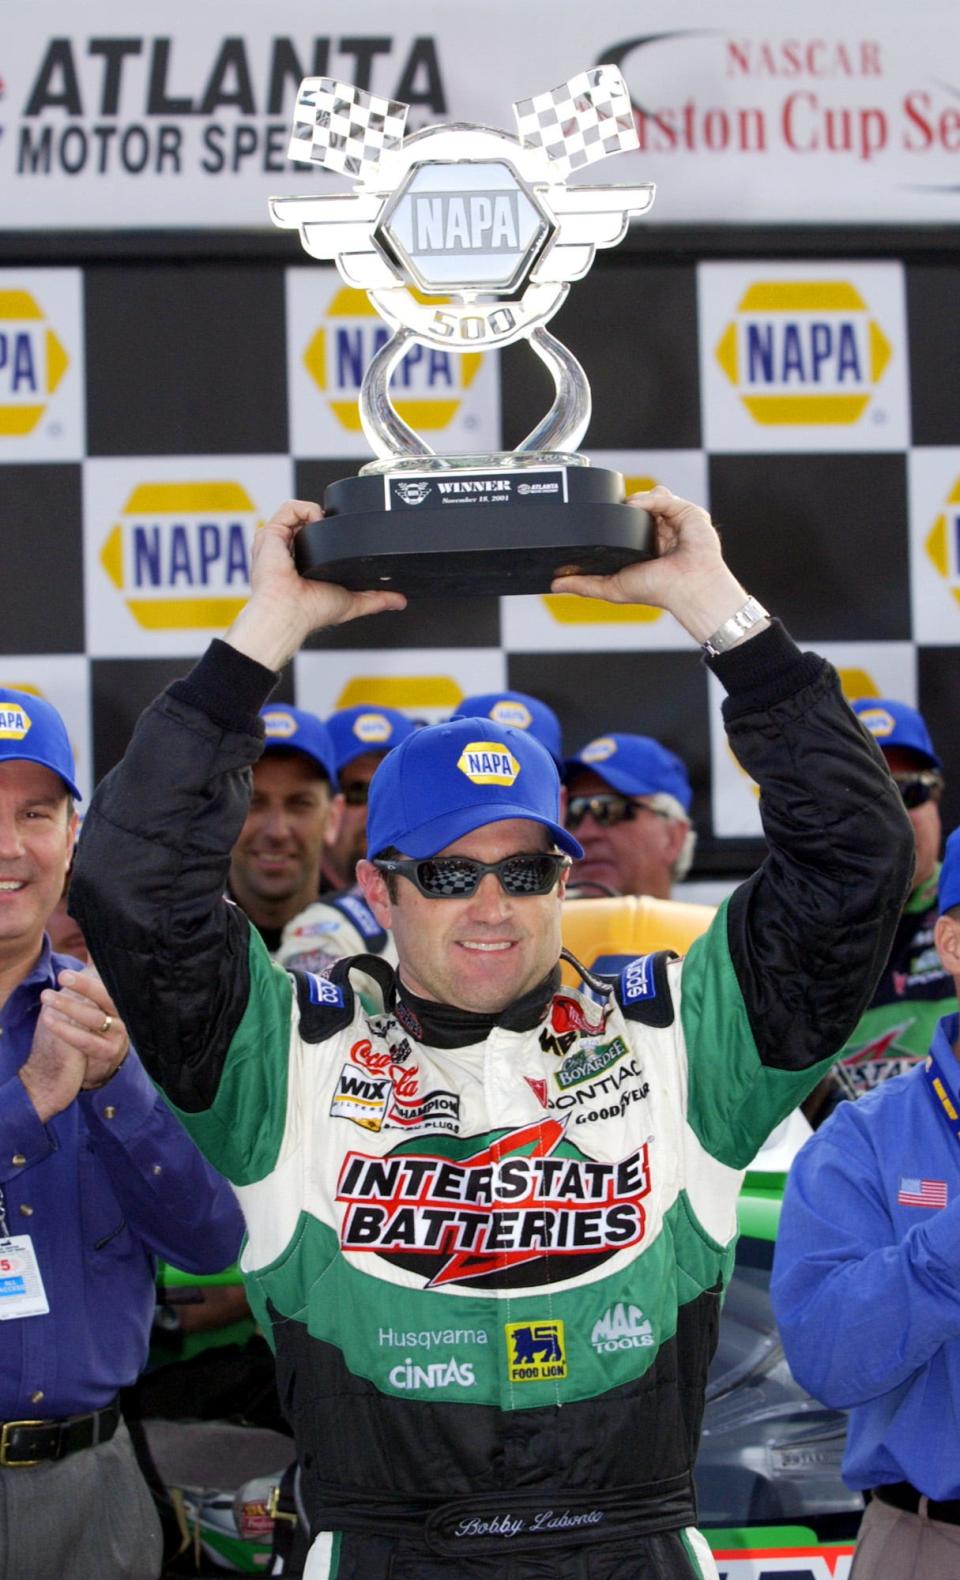 Bobby Labonte won the 2000 Cup Series championship on his way to the NASCAR Hall of Fame.